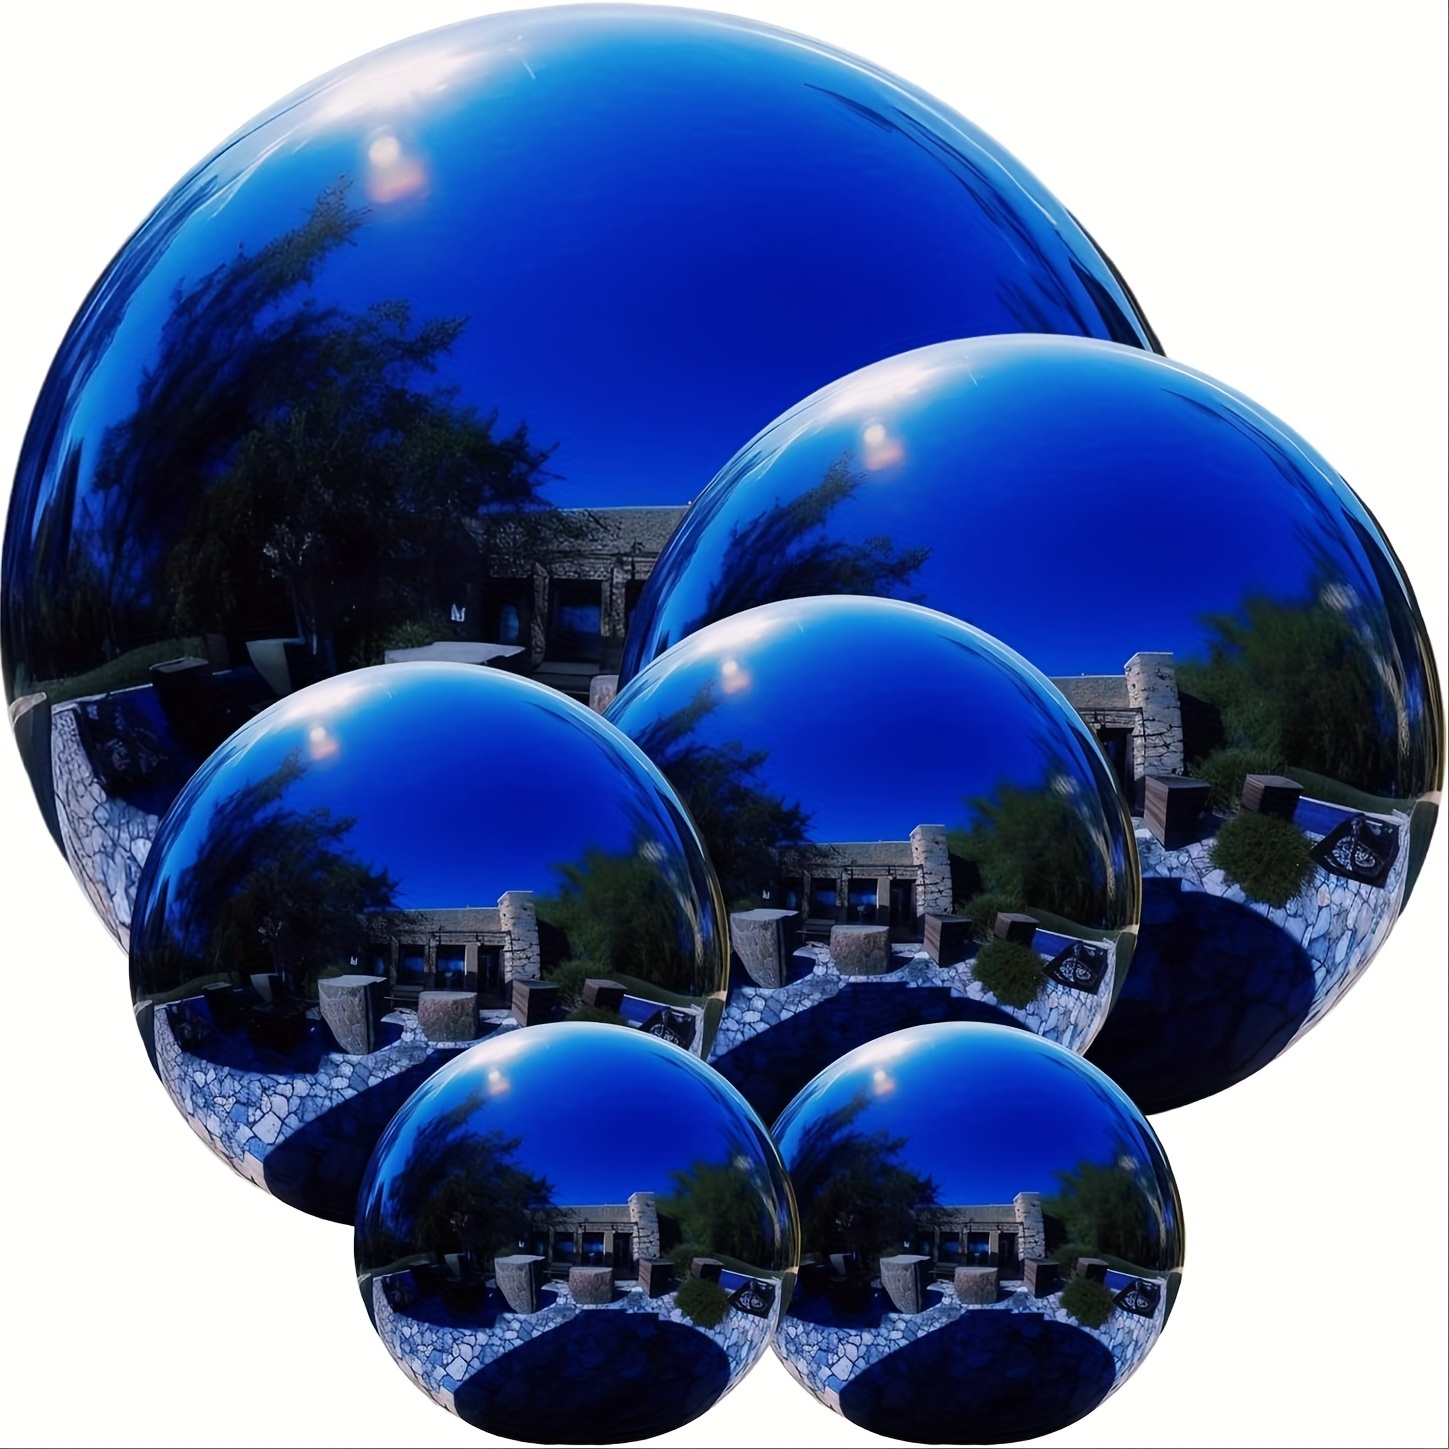 

6pcs, Stainless Steel Gazing Ball, Blue Mirror Polished Hollow Ball Reflective Garden Ball, Pre-drilled Gazing Globe For Home Garden Ornament Decorations